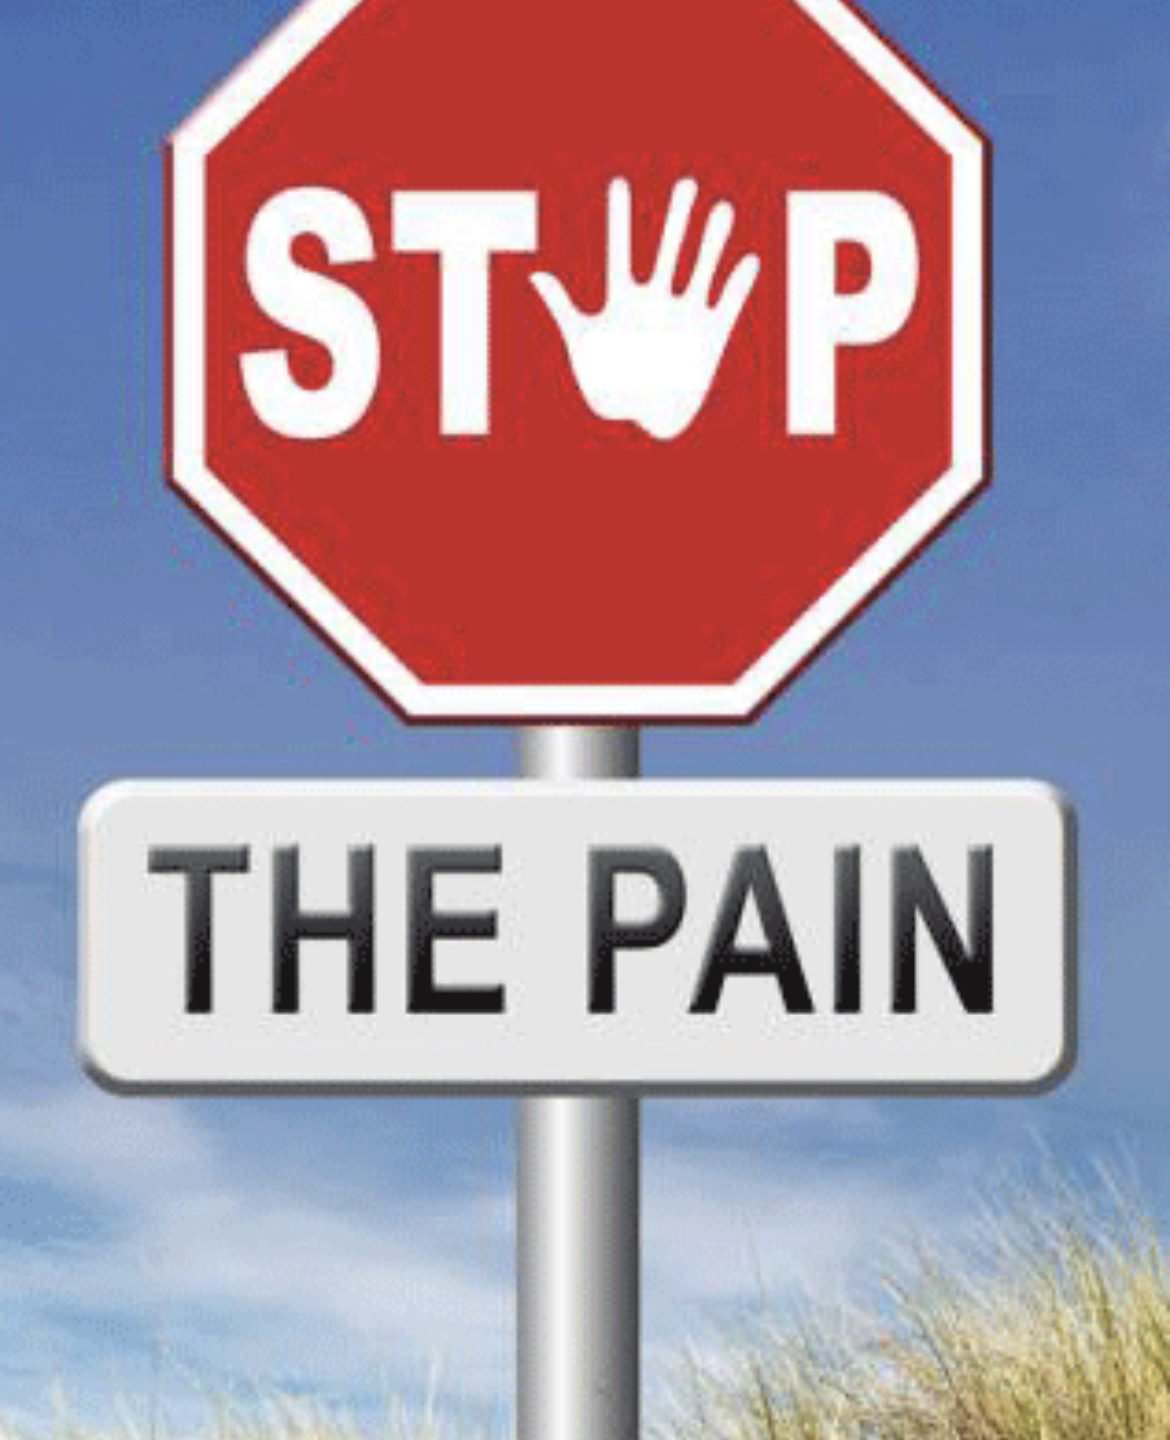 For Therapists – “Stop The Pain”